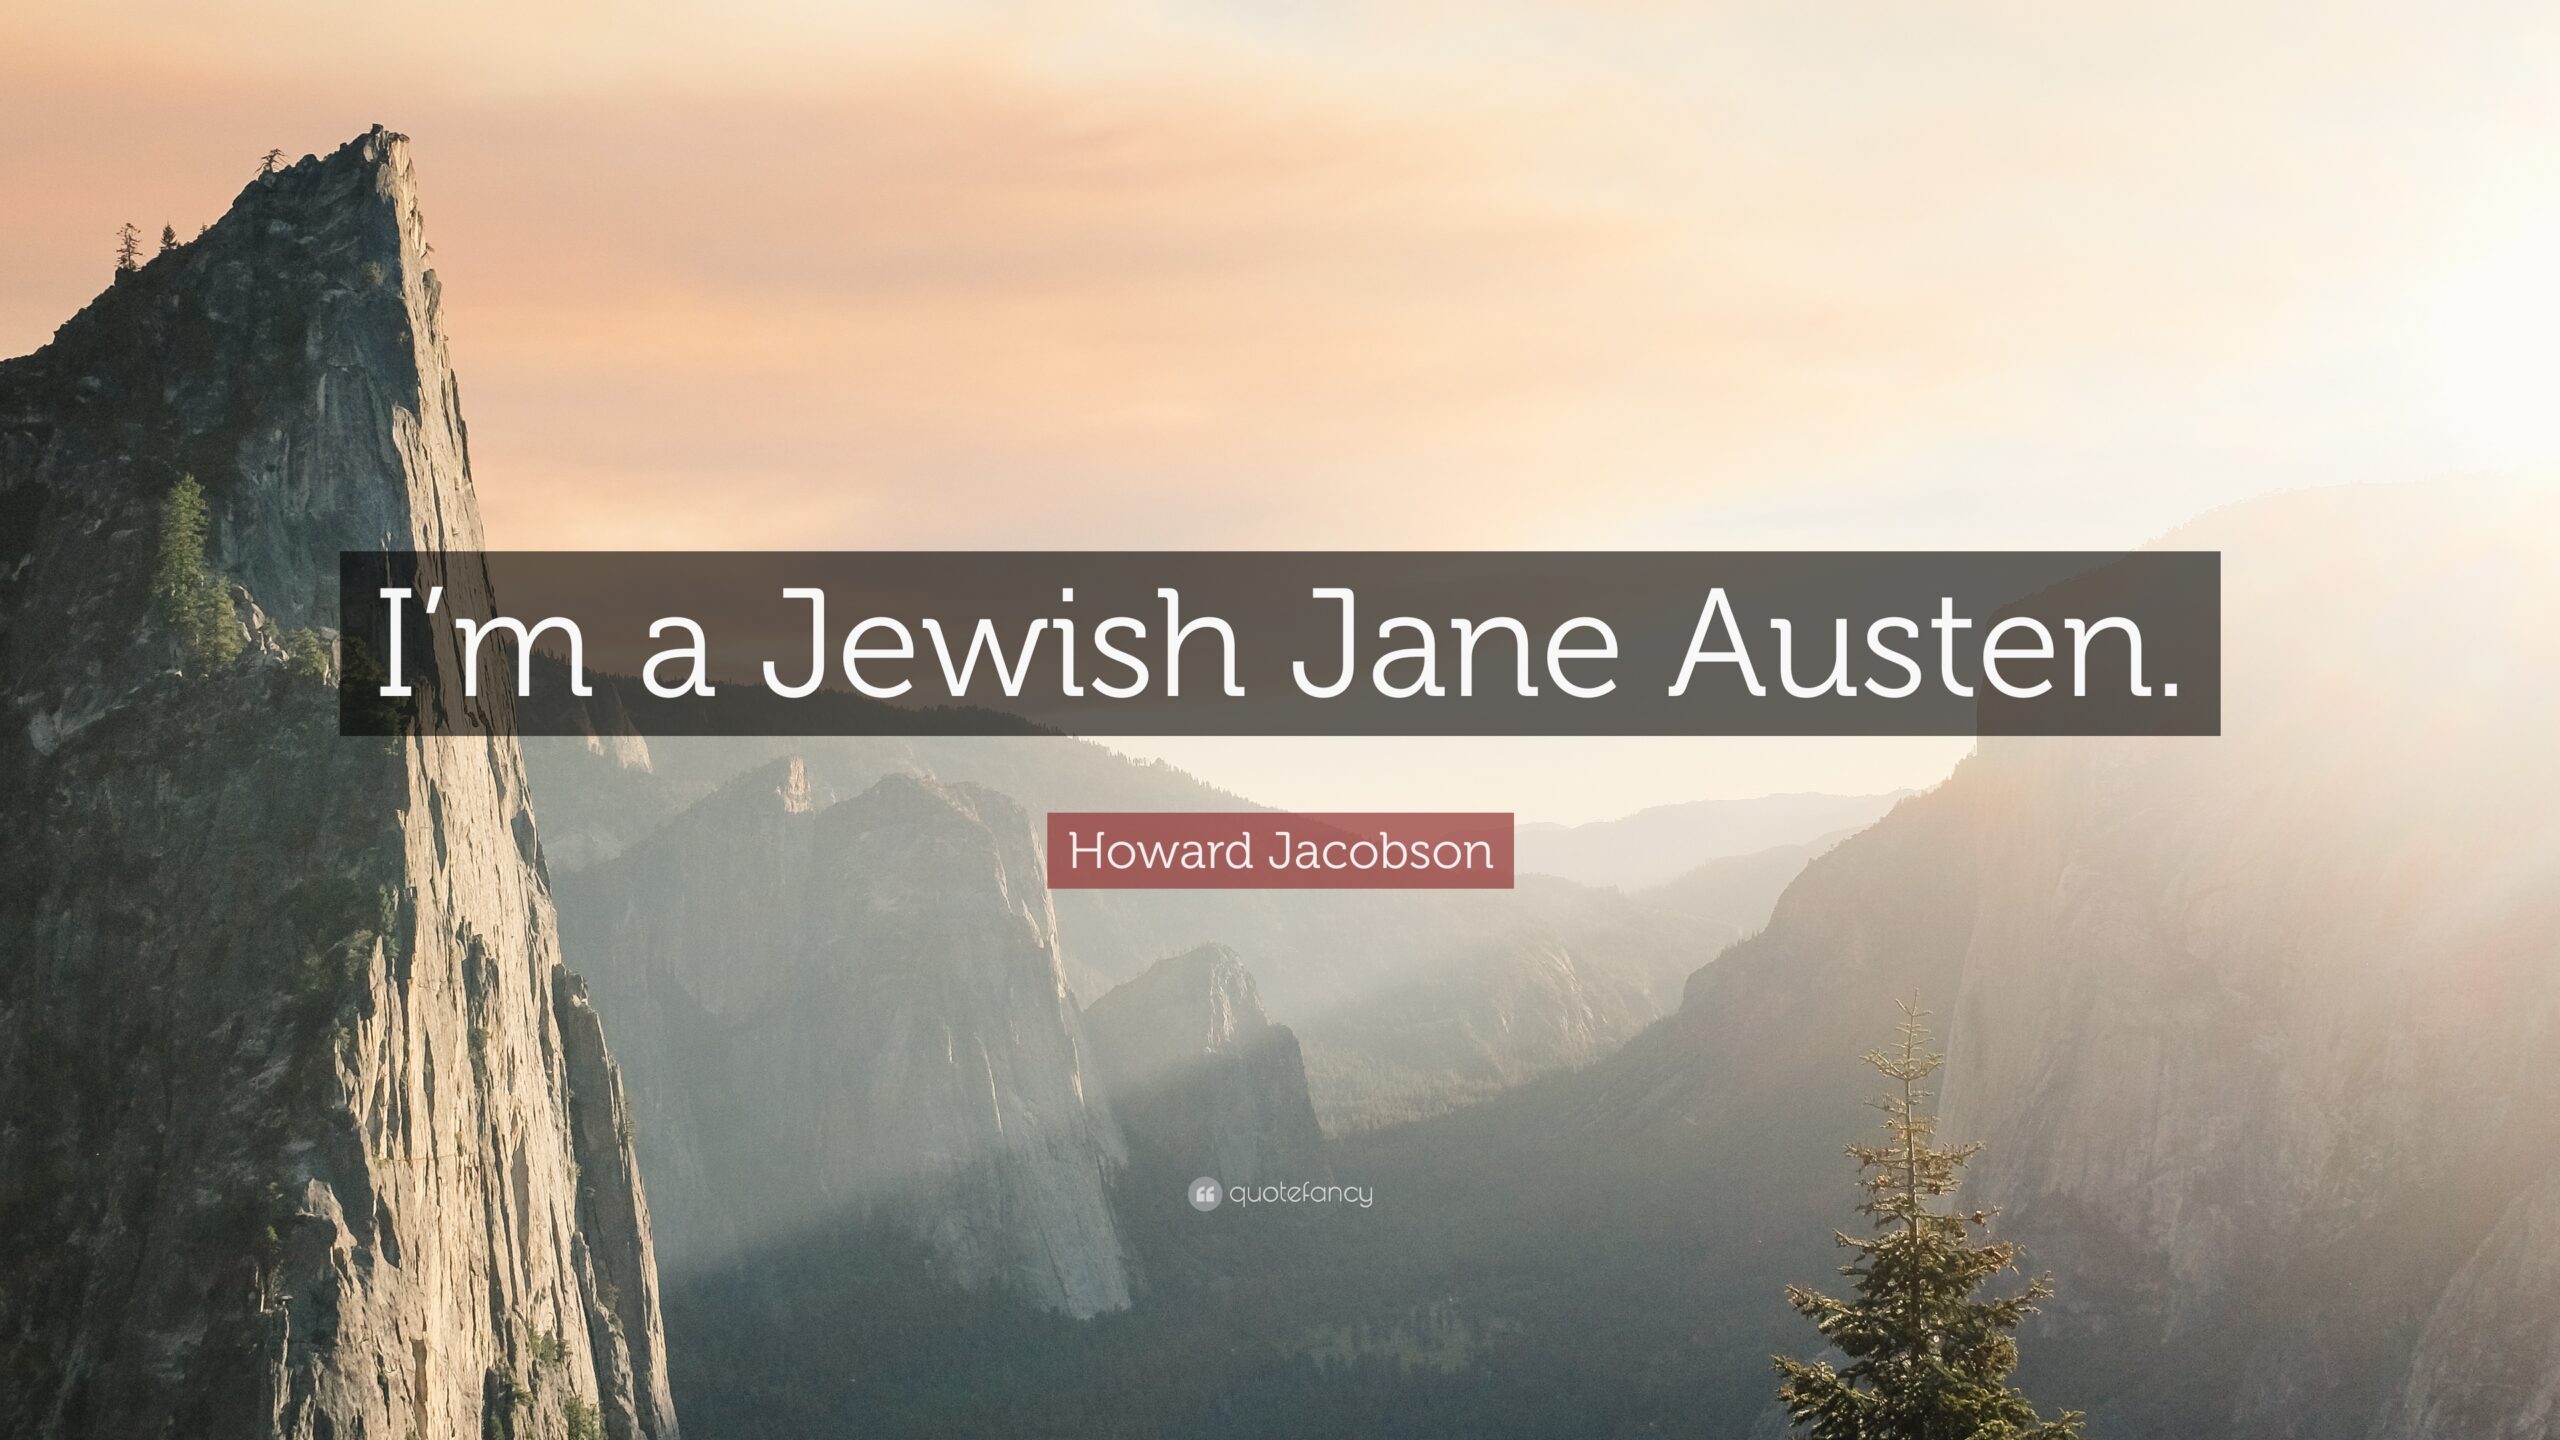 Howard Jacobson Quote “I’m a Jewish Jane Austen”